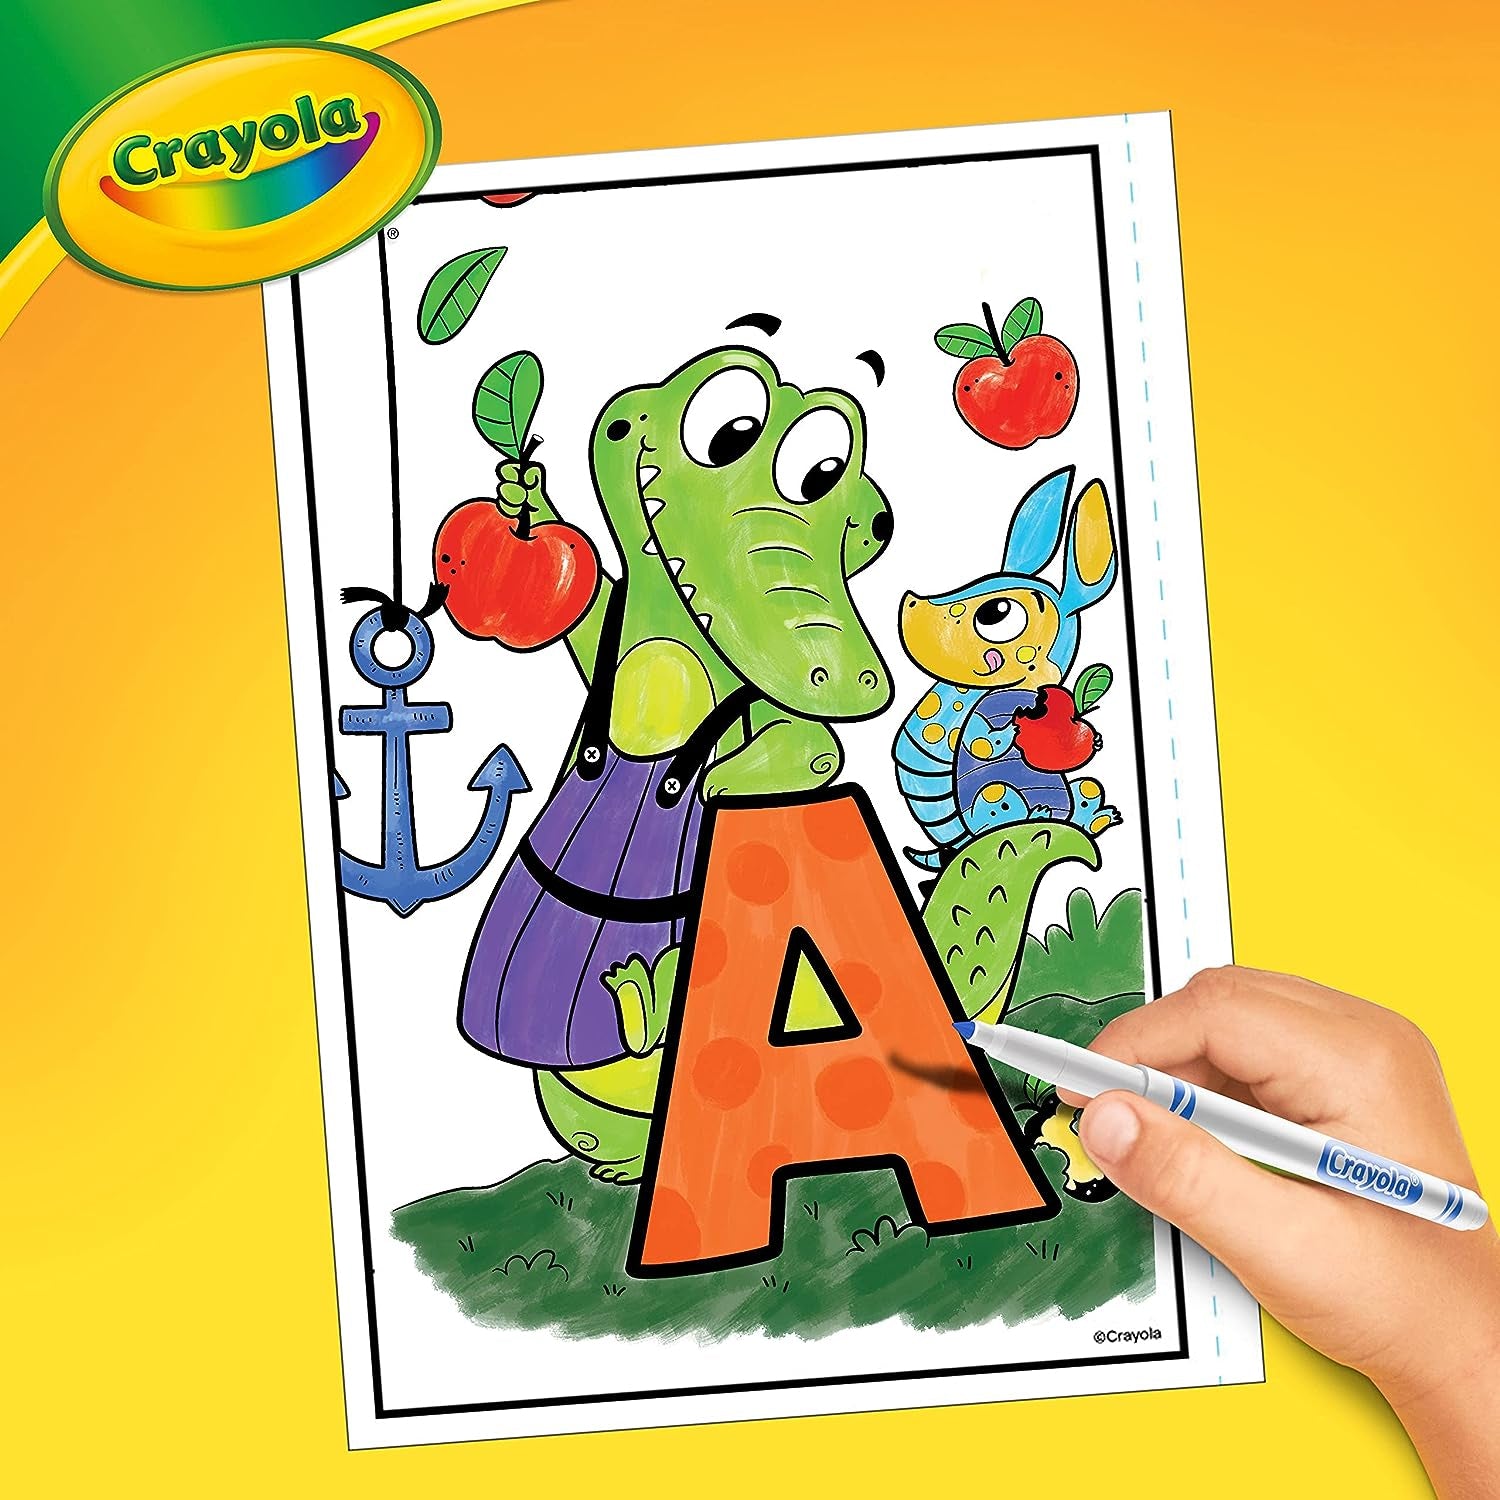 Crayola Alpha Pets Coloring Pages and Stickers, Number & Alphabet Coloring Book